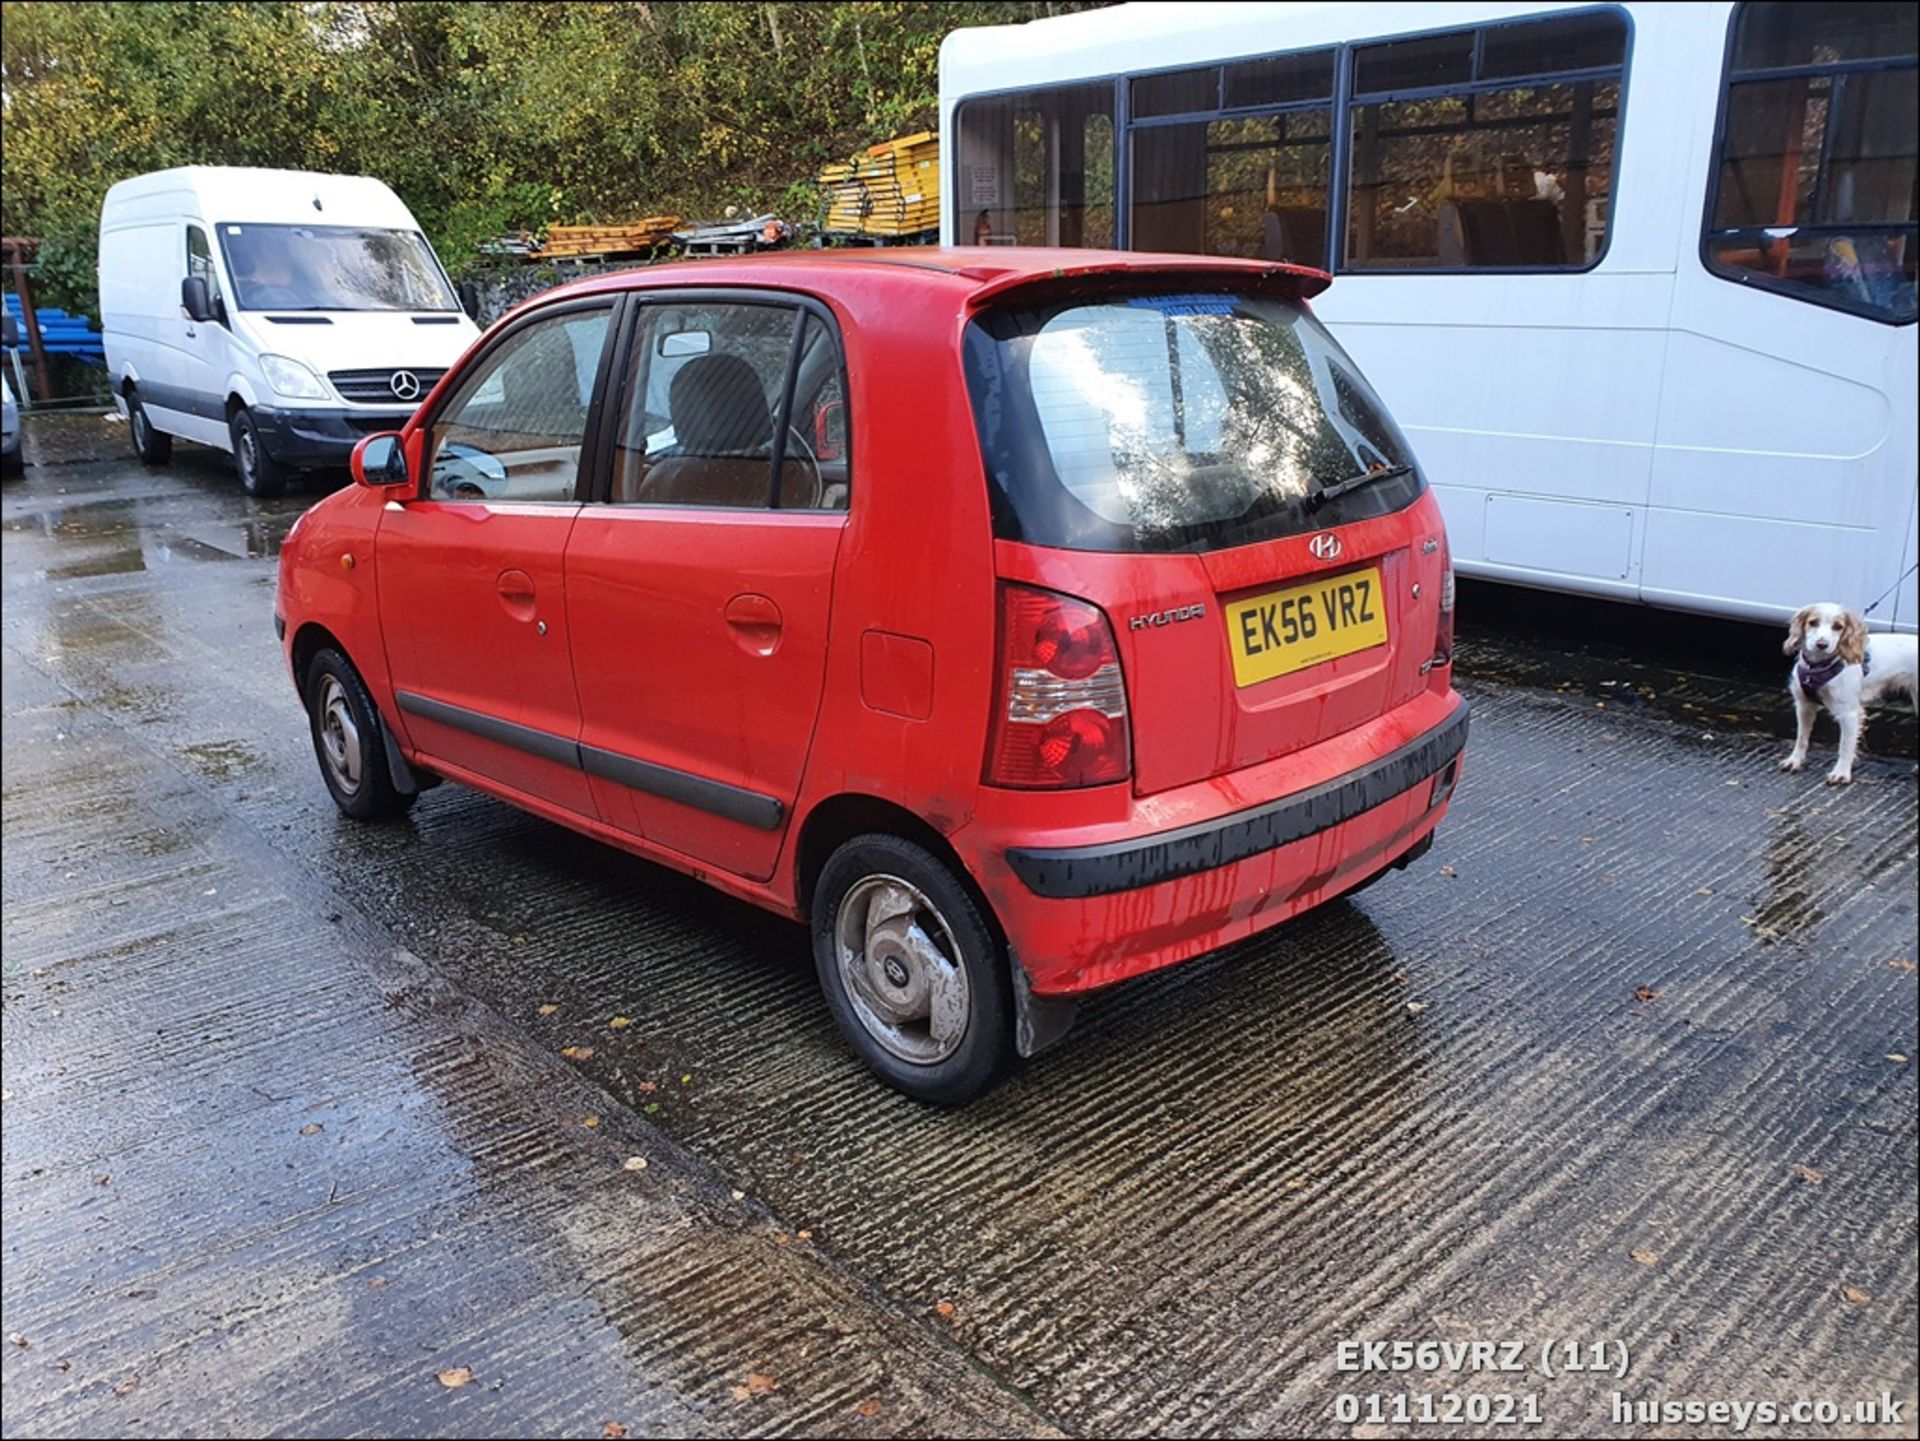 06/56 HYUNDAI AMICA CDX - 1086cc 5dr Hatchback (Red, 60k) - Image 11 of 18